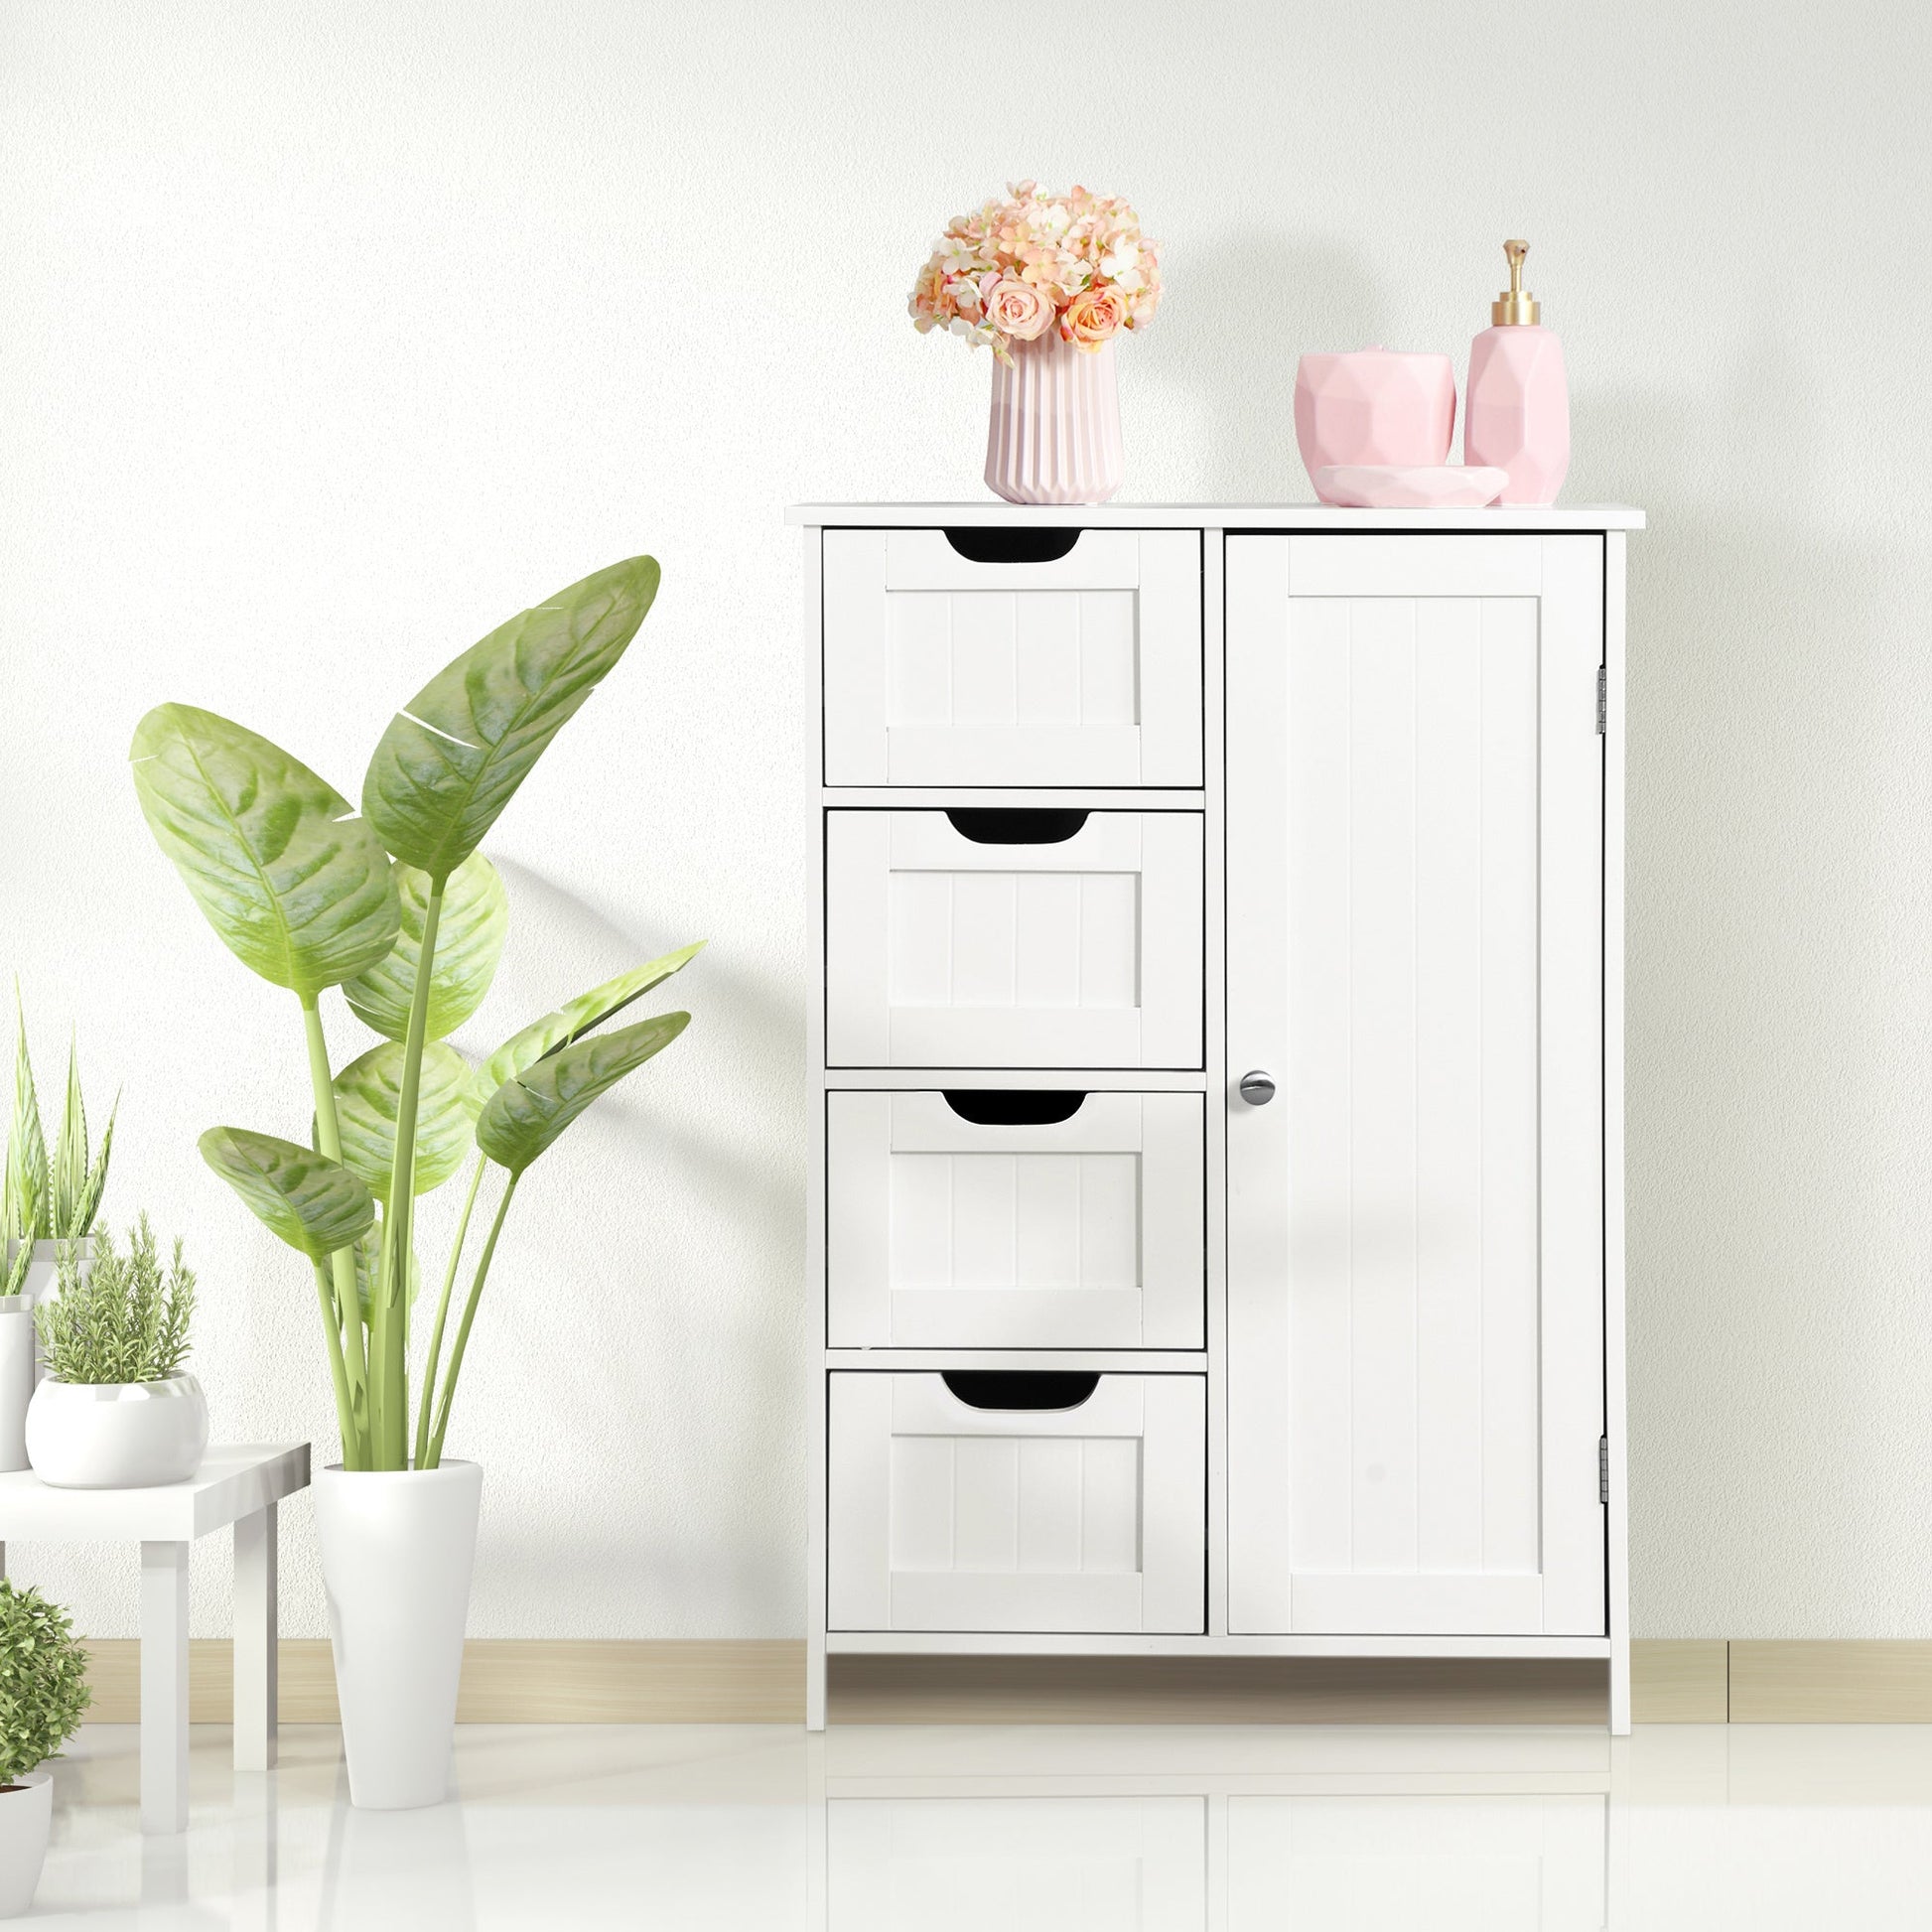 White Bathroom Storage Cabinet, Floor Cabinet with Adjustable Shelf and Drawers Home Decor by Design